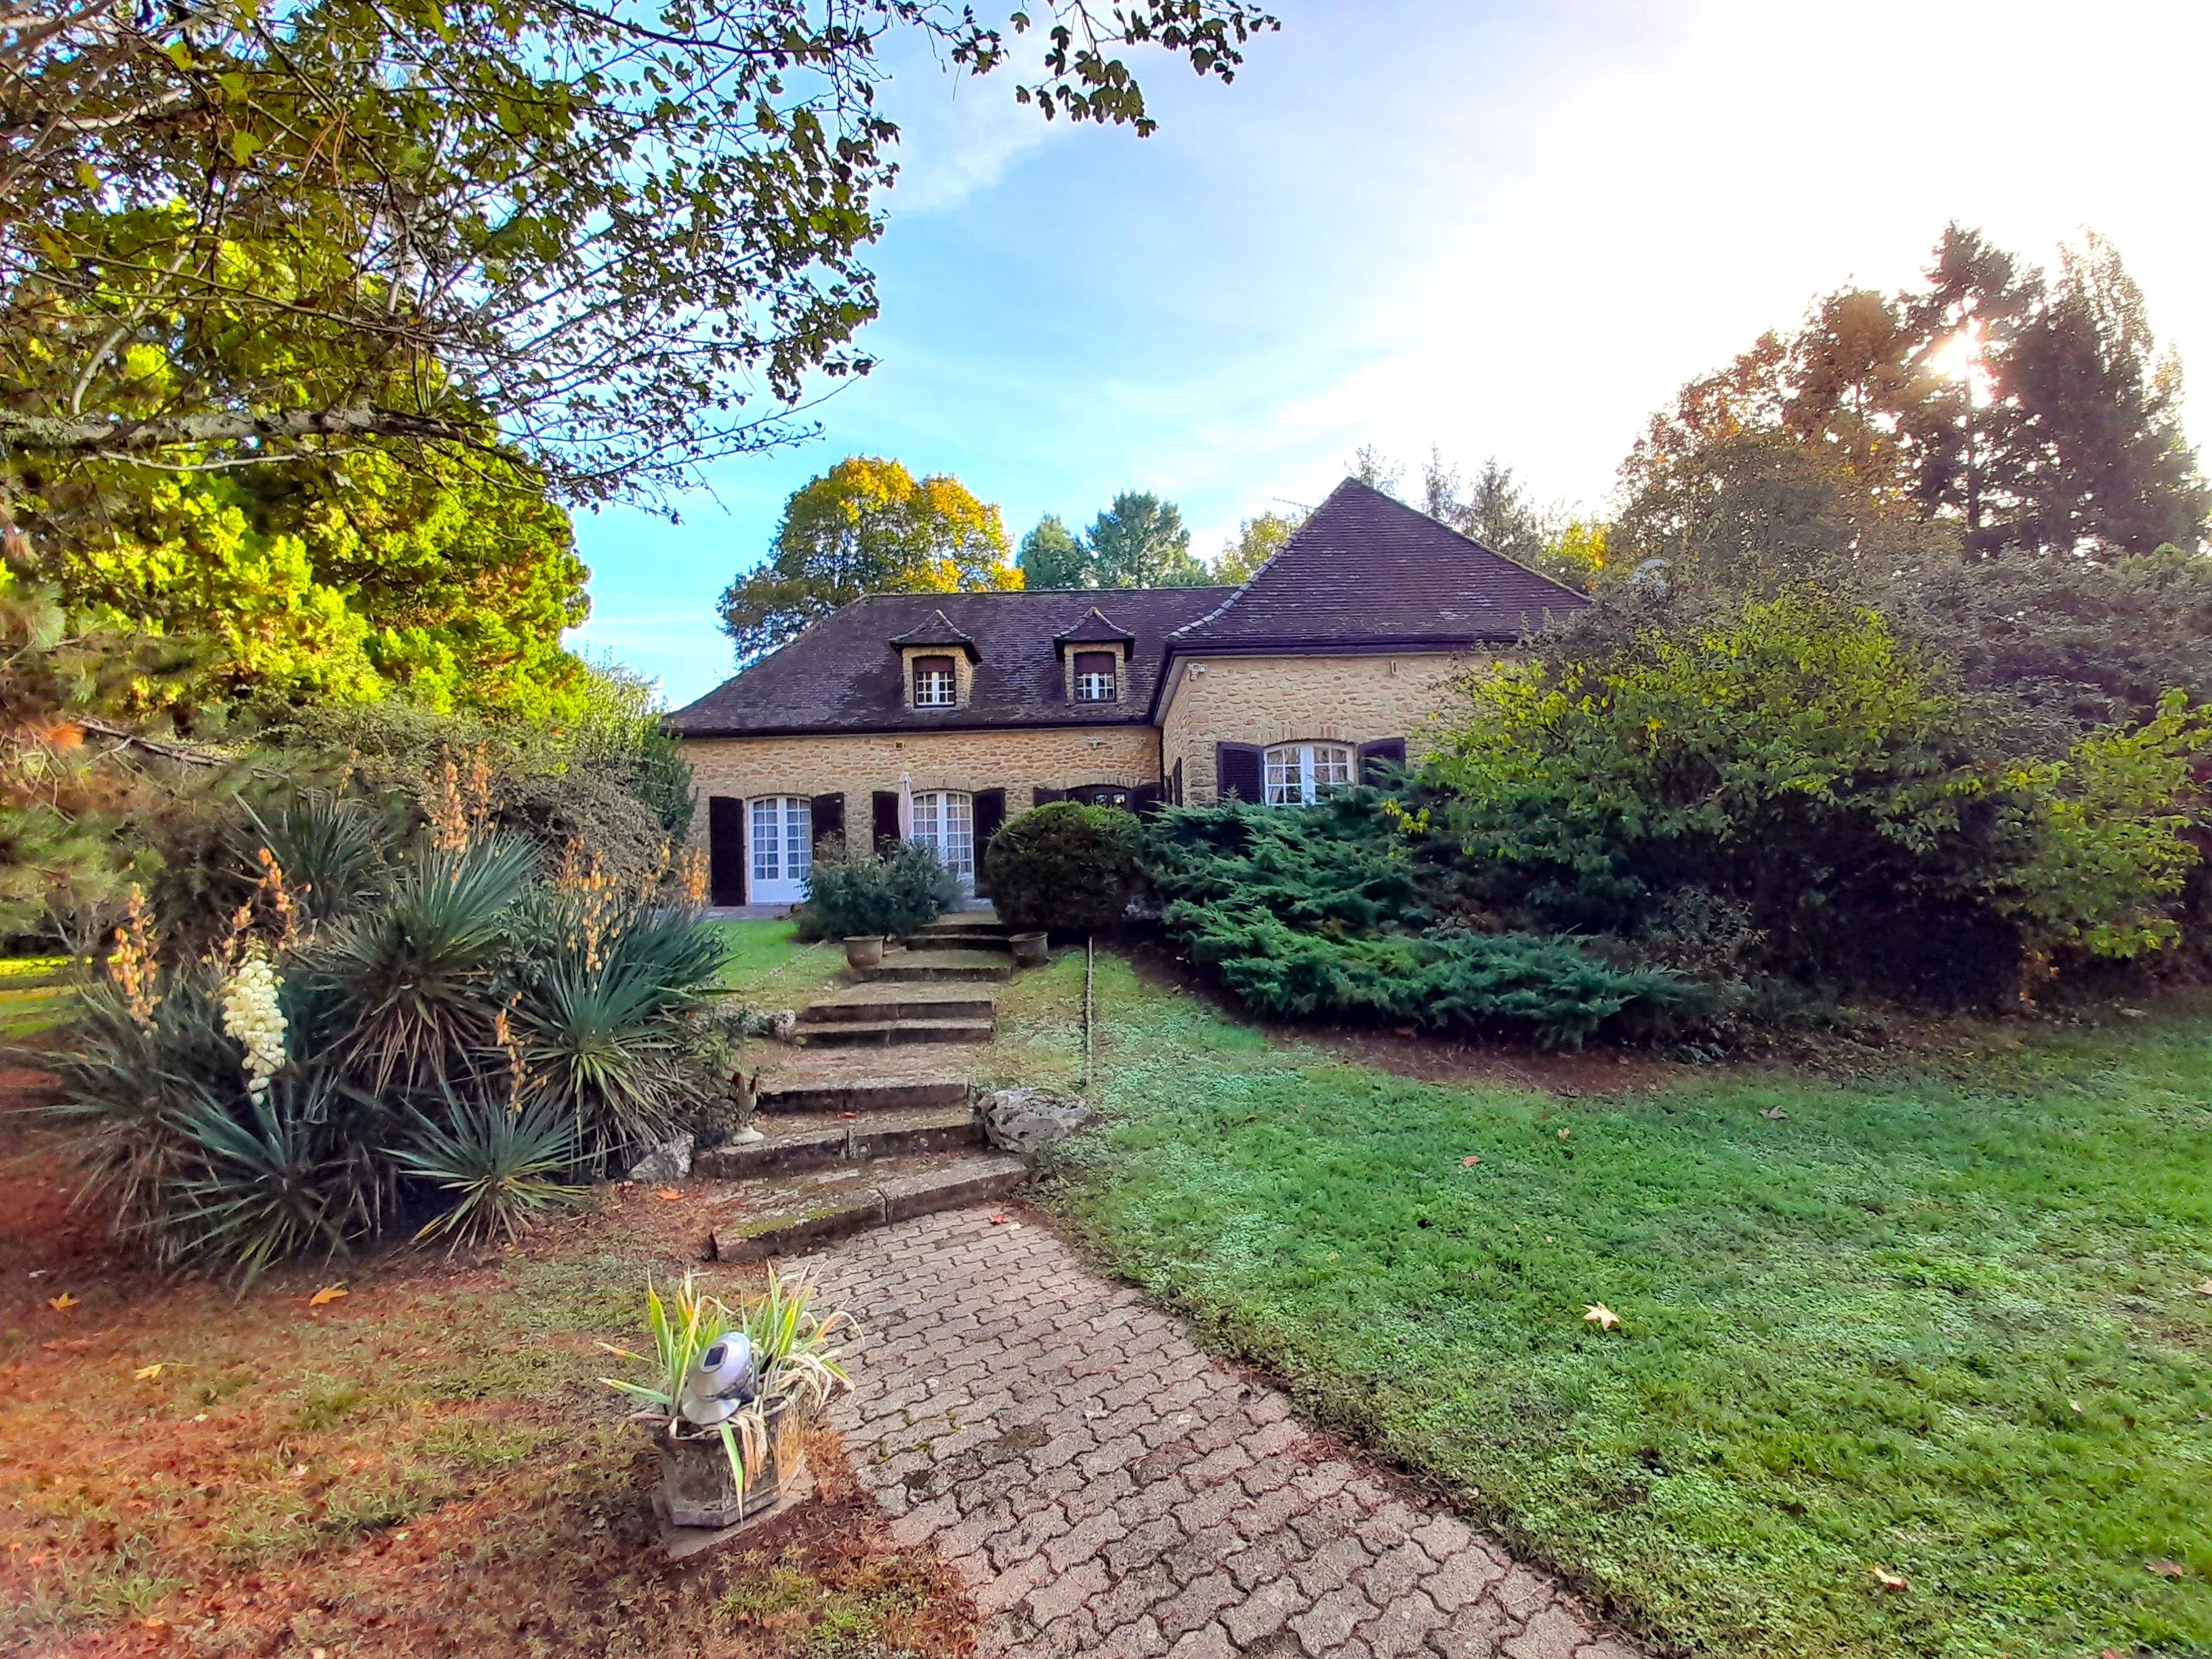 Spacious family home set in mature gardens walking distance to bastide town